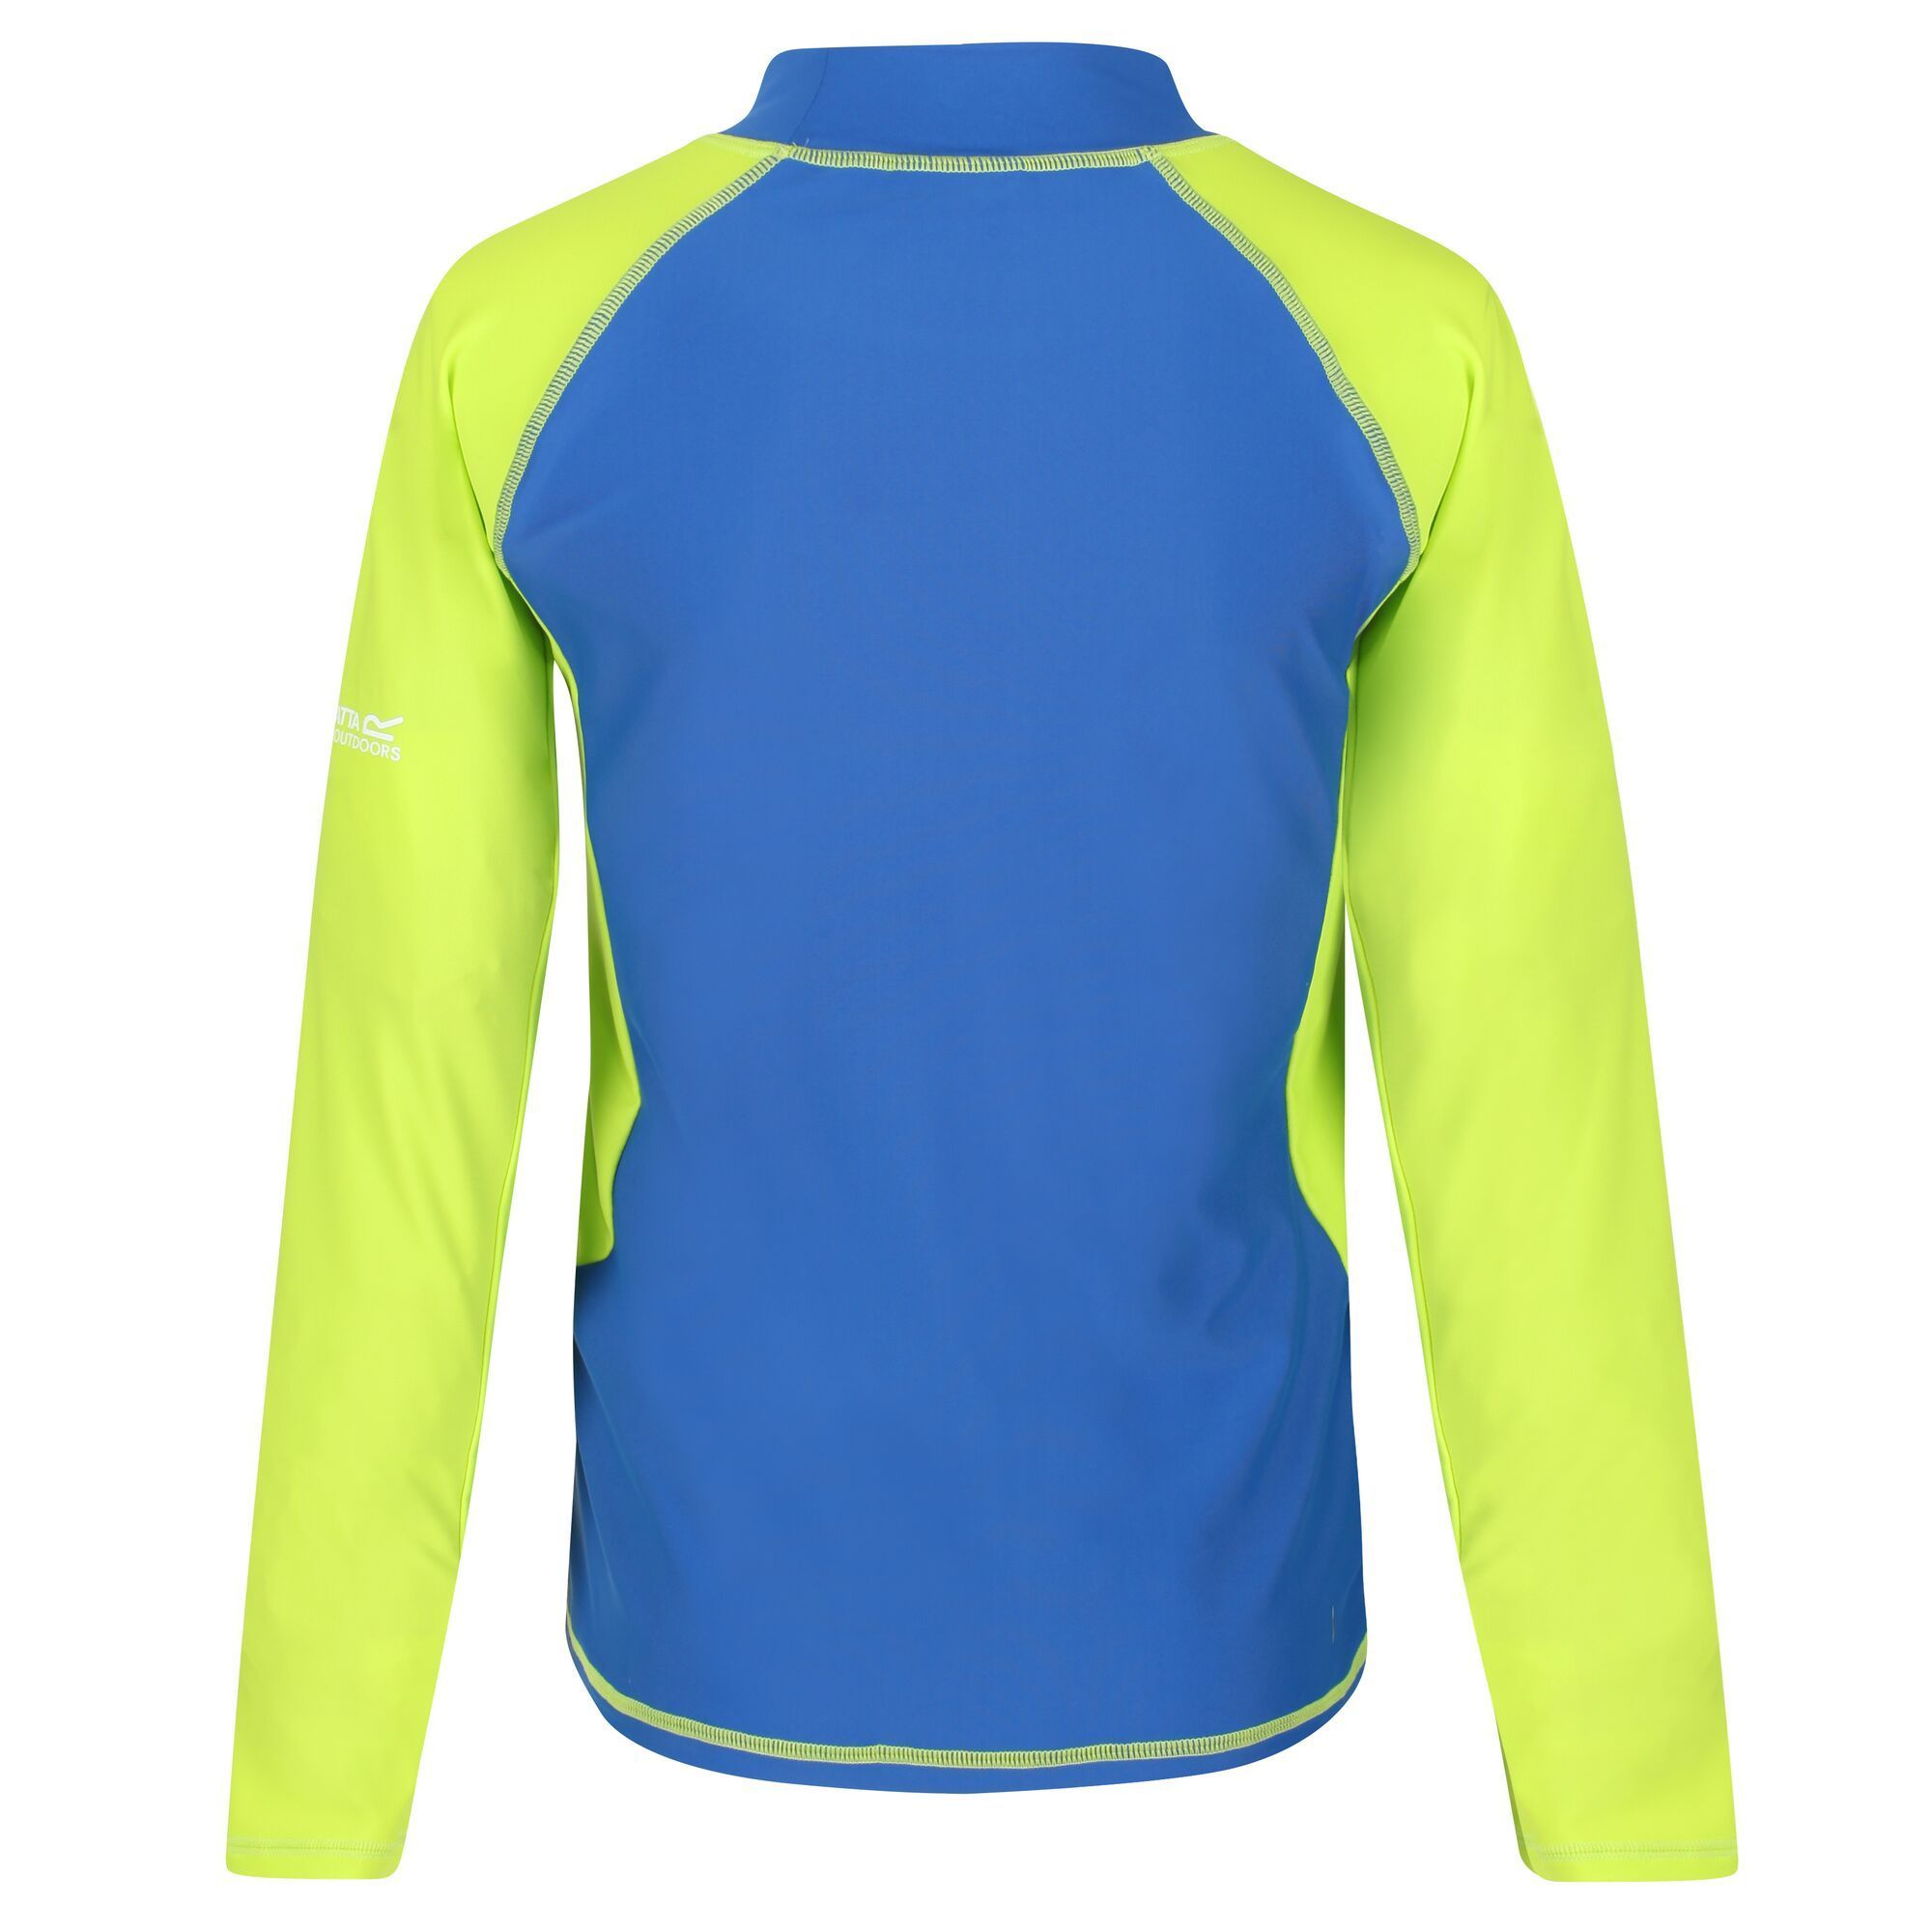 Material: 82% Polyamide, 18% Elastane. Soft touch and lightweight long sleeve swim top. UV protection (UPF) built in.